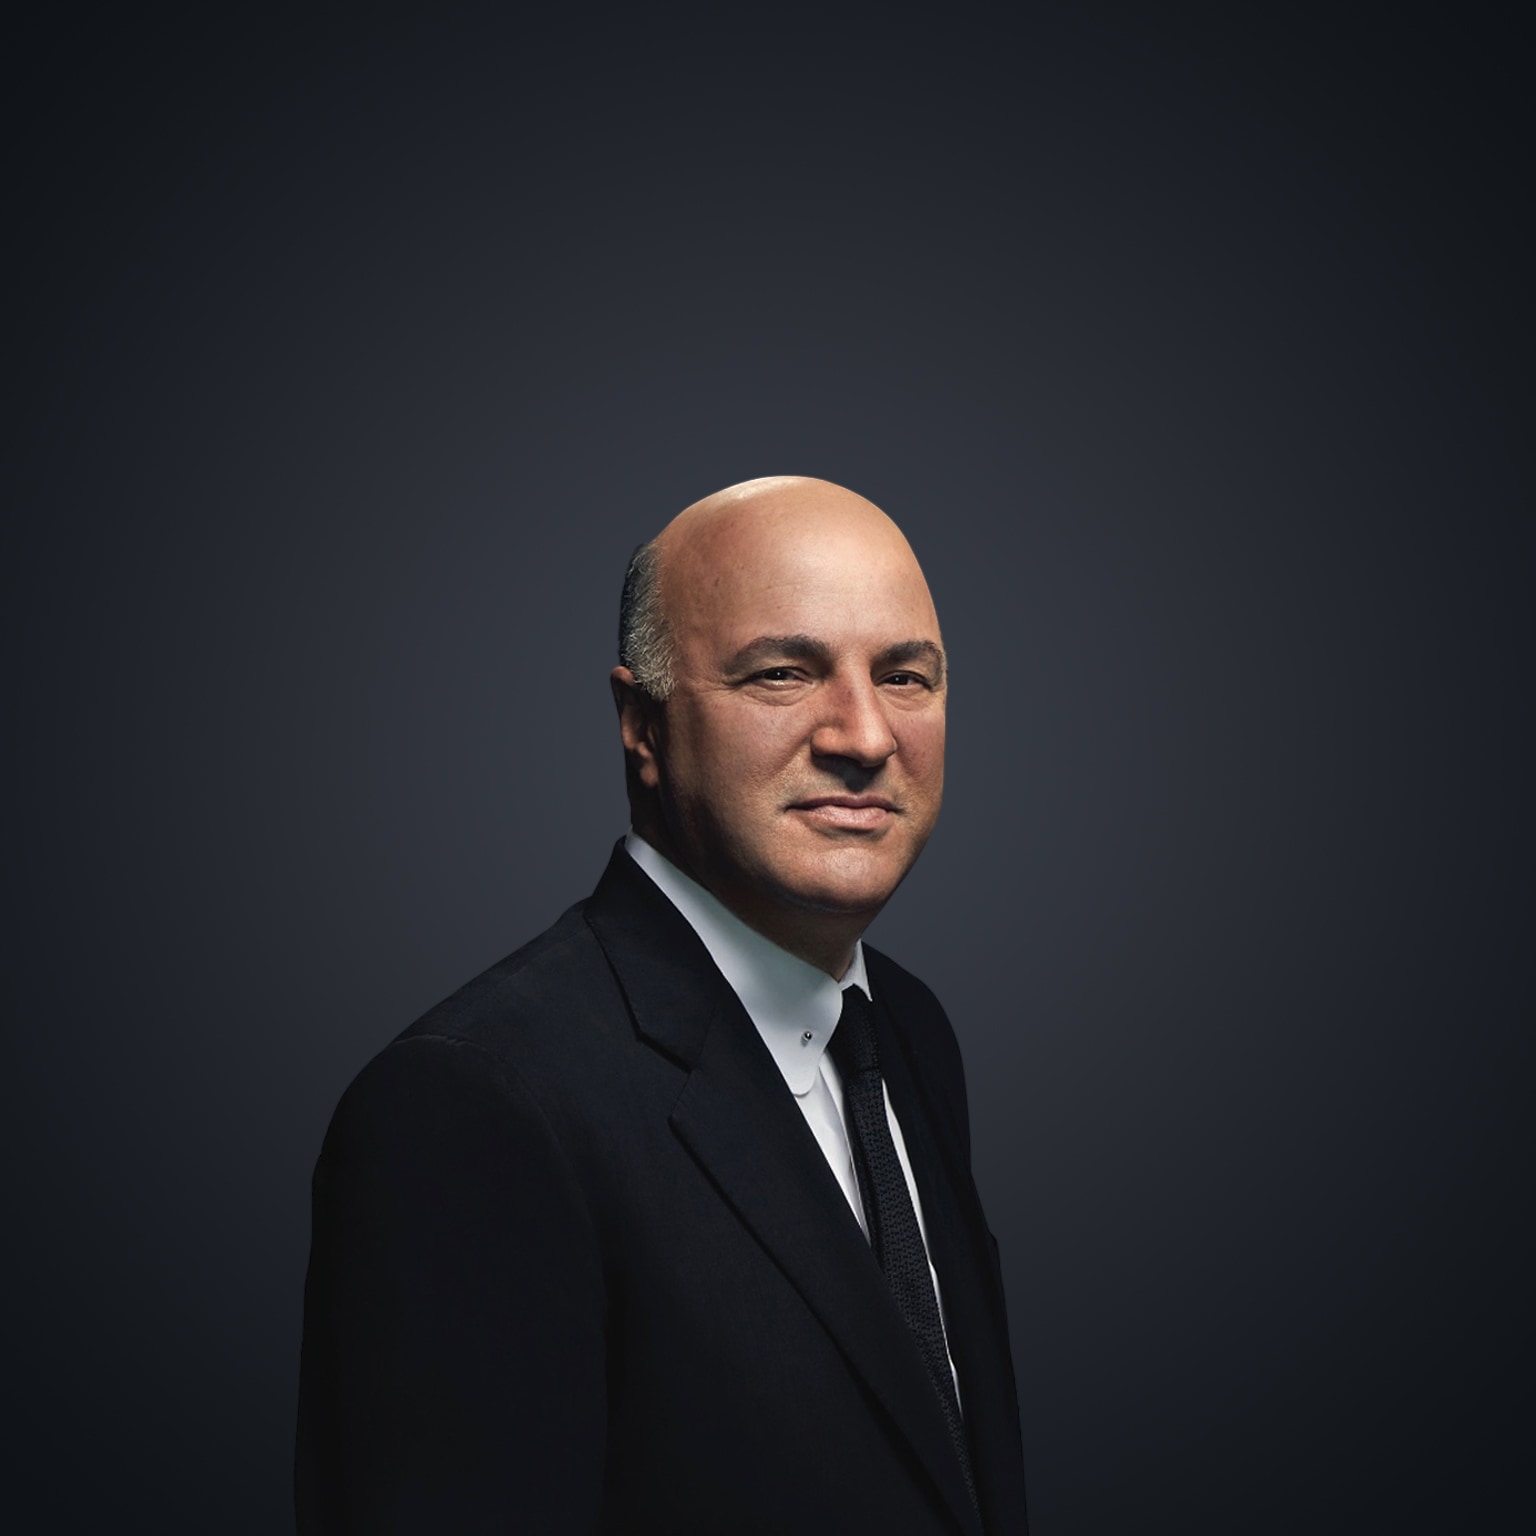 Kevin O'leary Net Worth 2020 Goimages Public